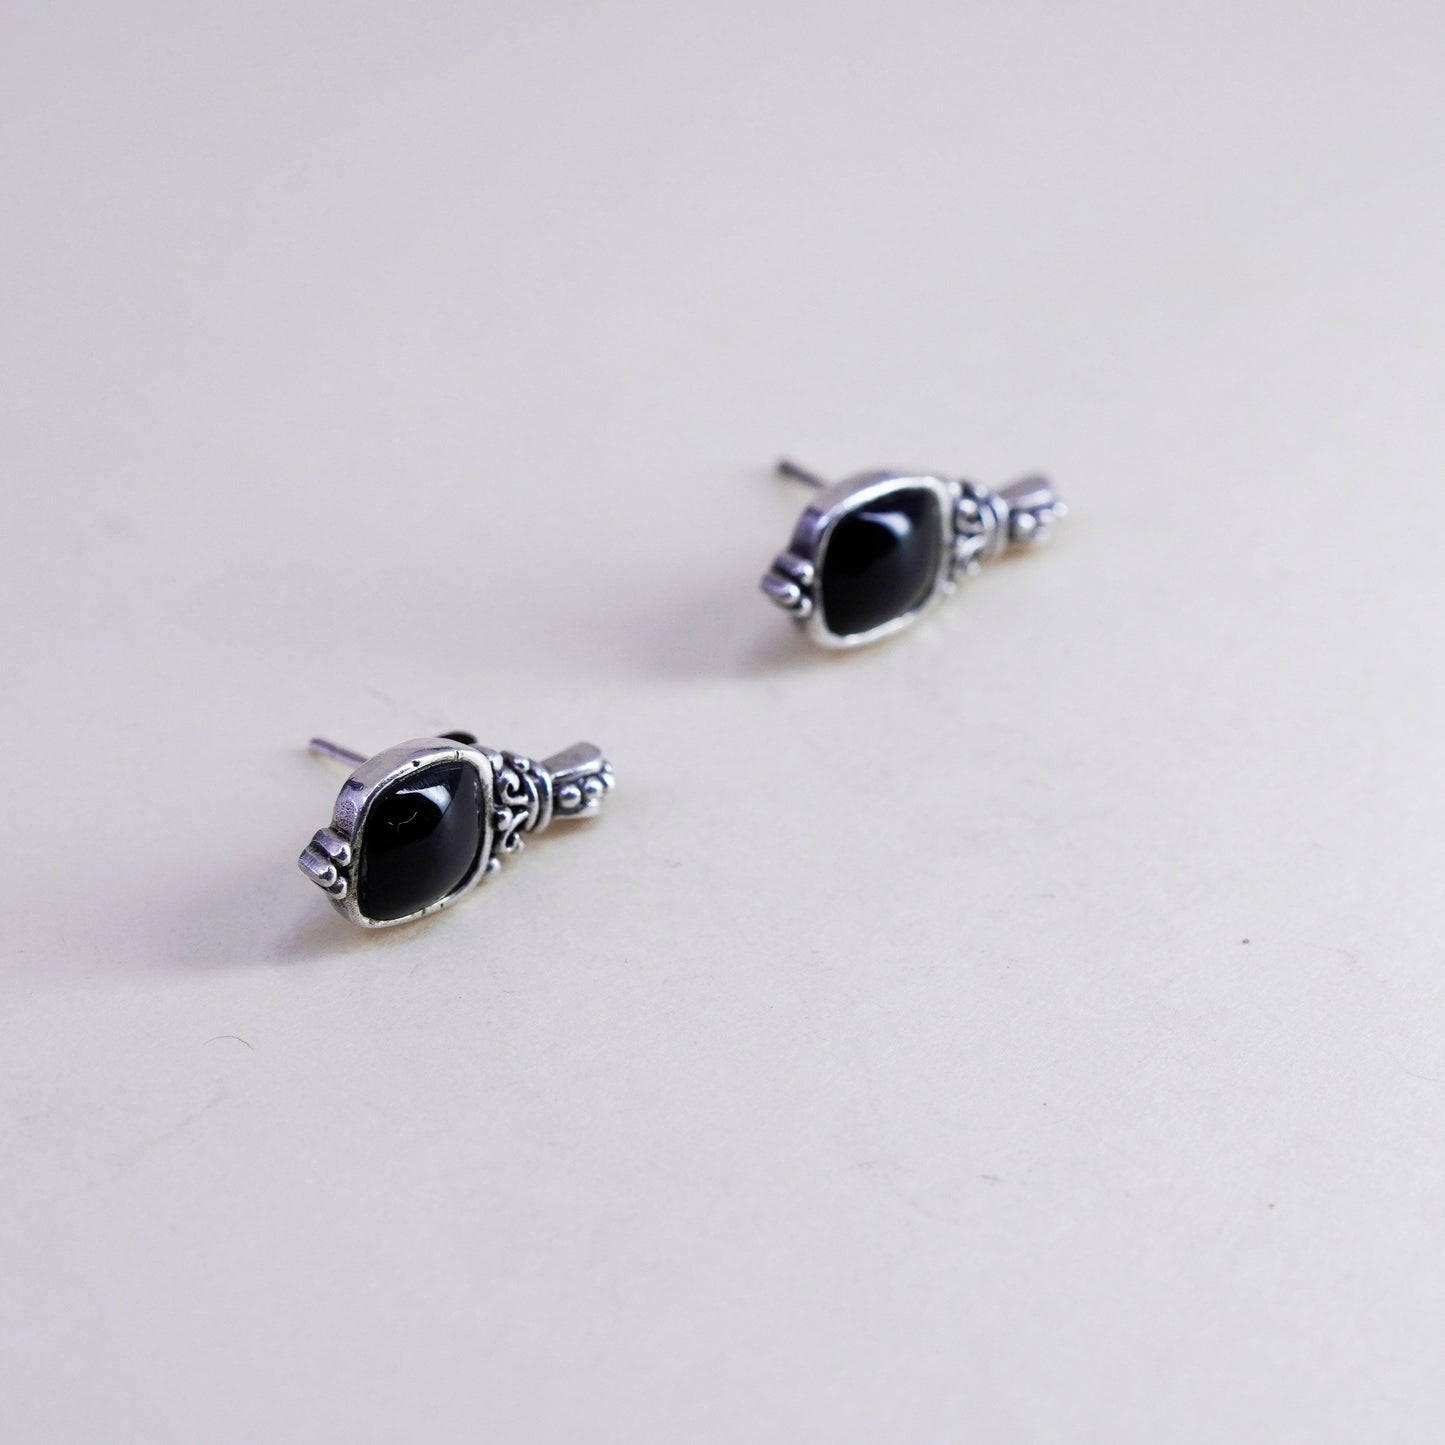 Vintage Sterling silver handmade earrings, Mexico 925 studs with onyx